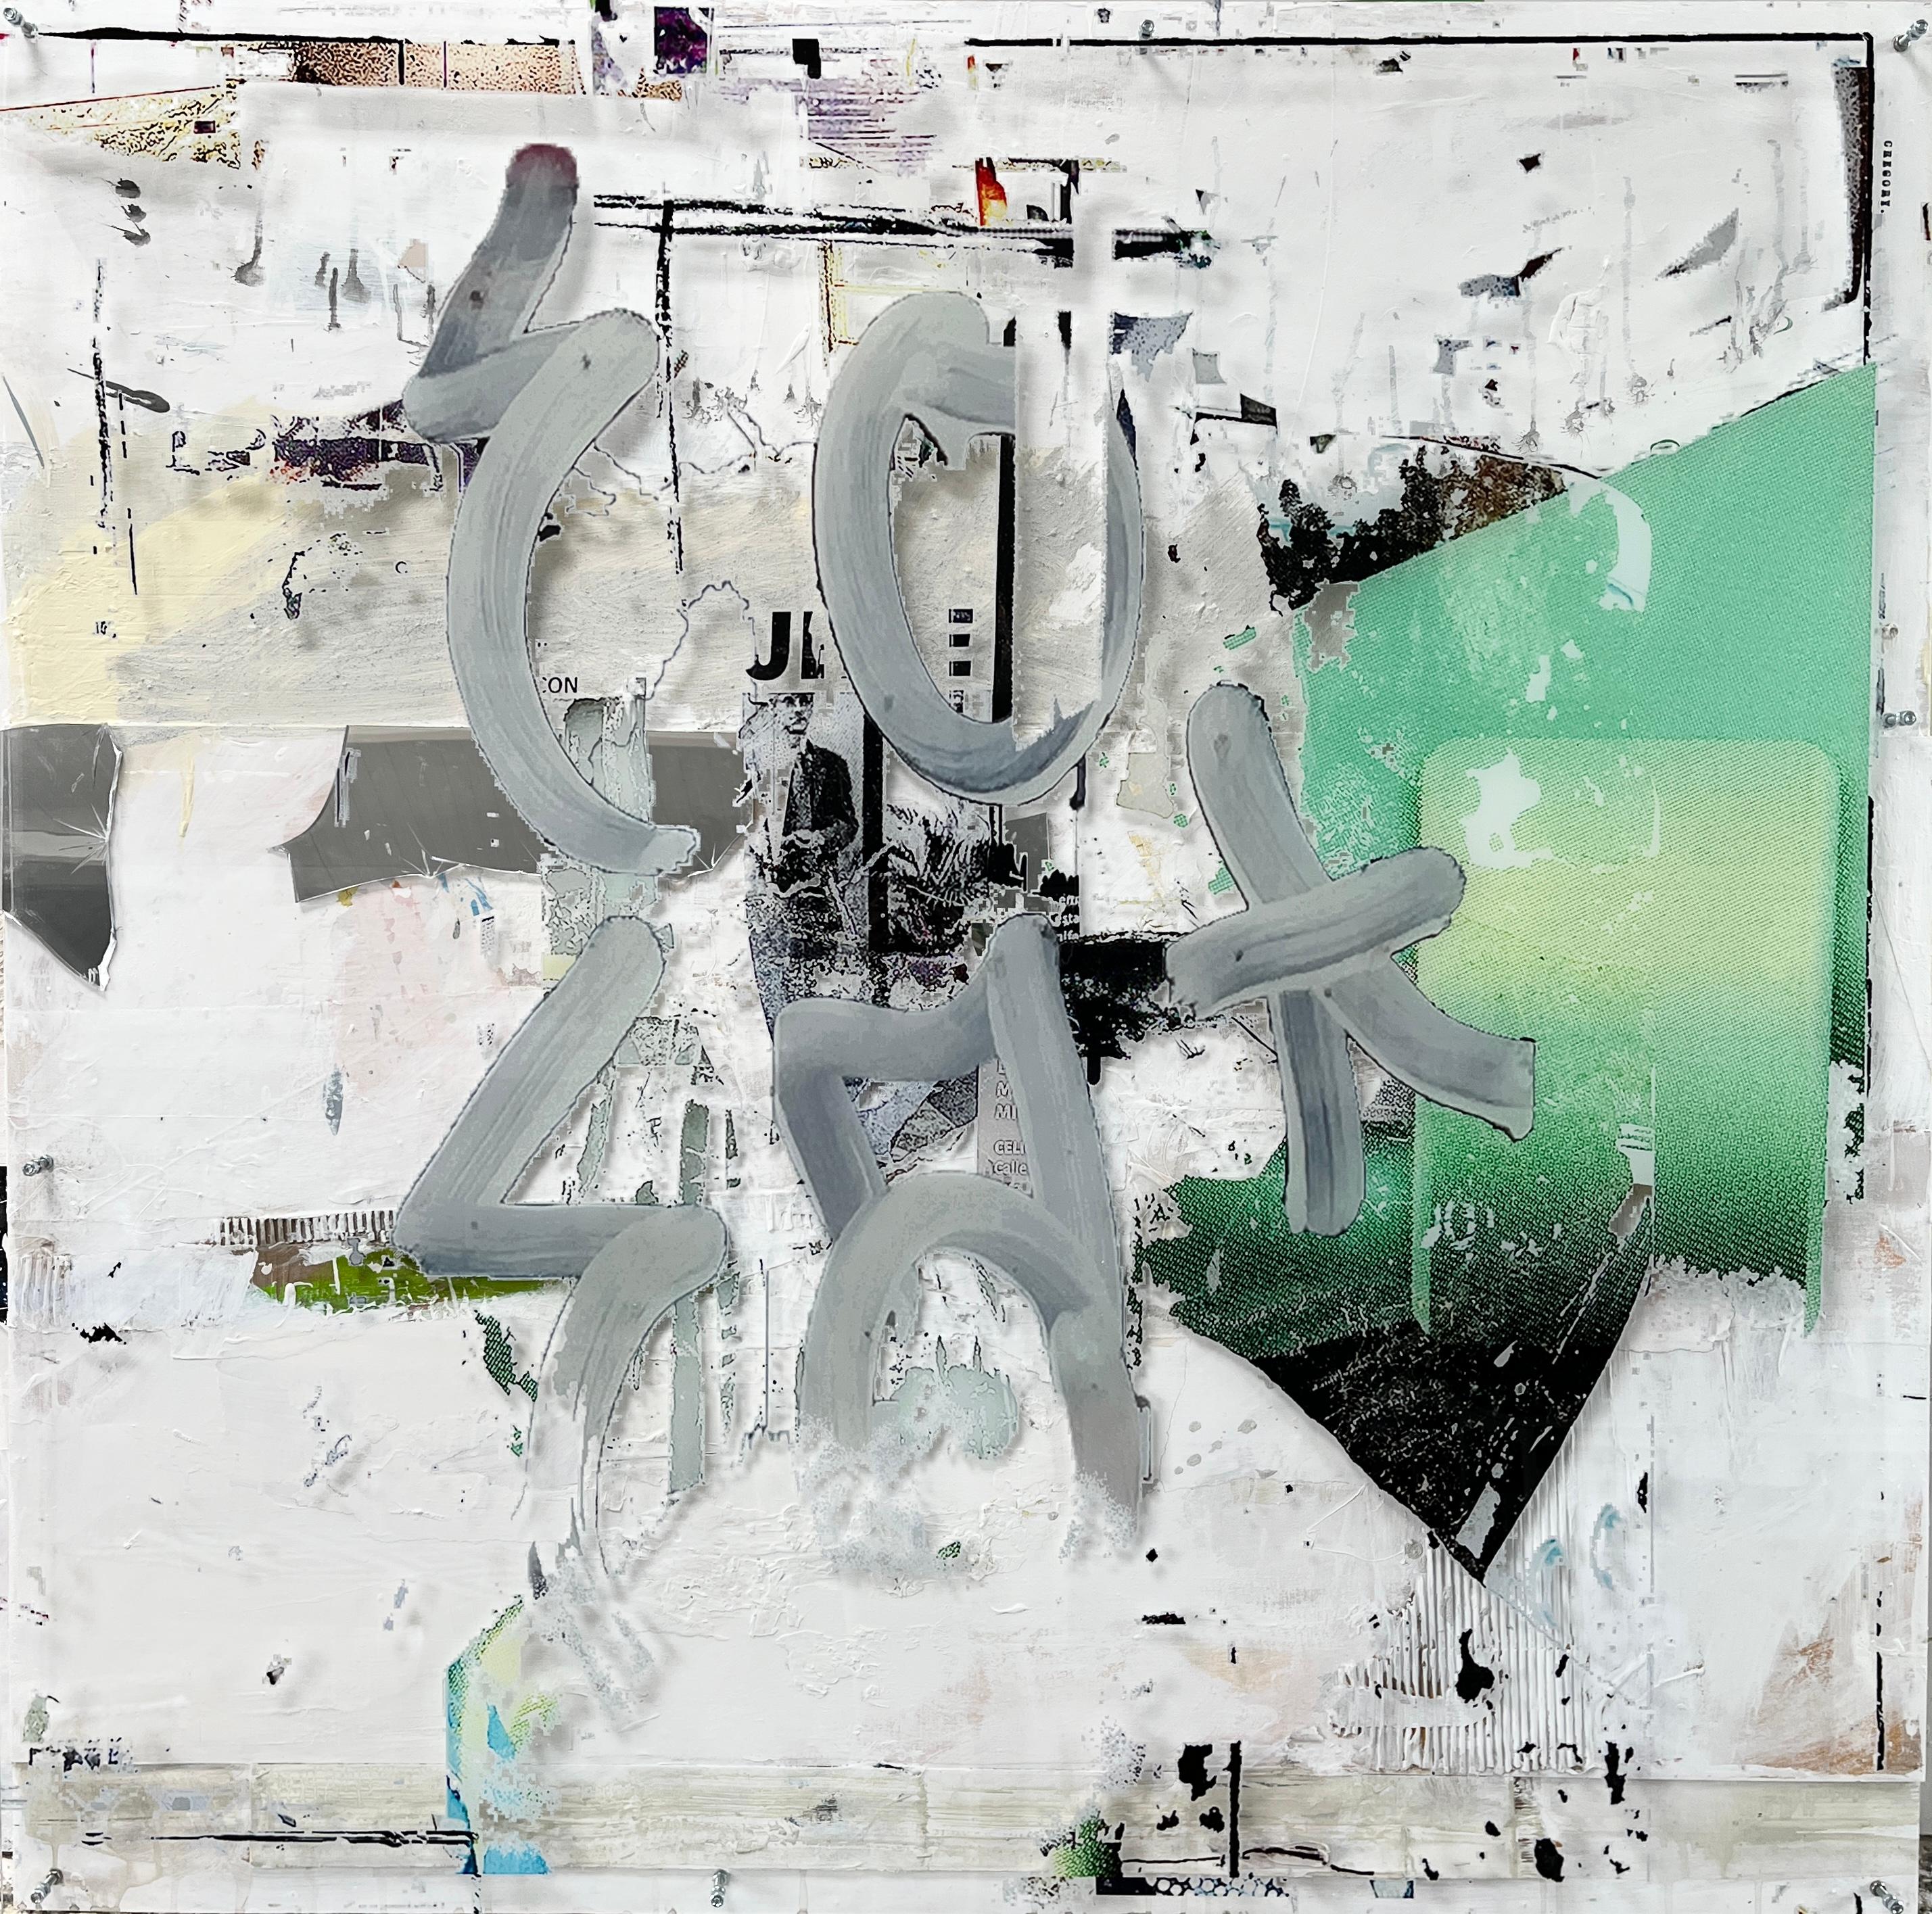 Gregory Watin
Back to Abstract
Mixed media on plexiglass and wood
55.1 x 55.1 inches (140 x 140 cm)